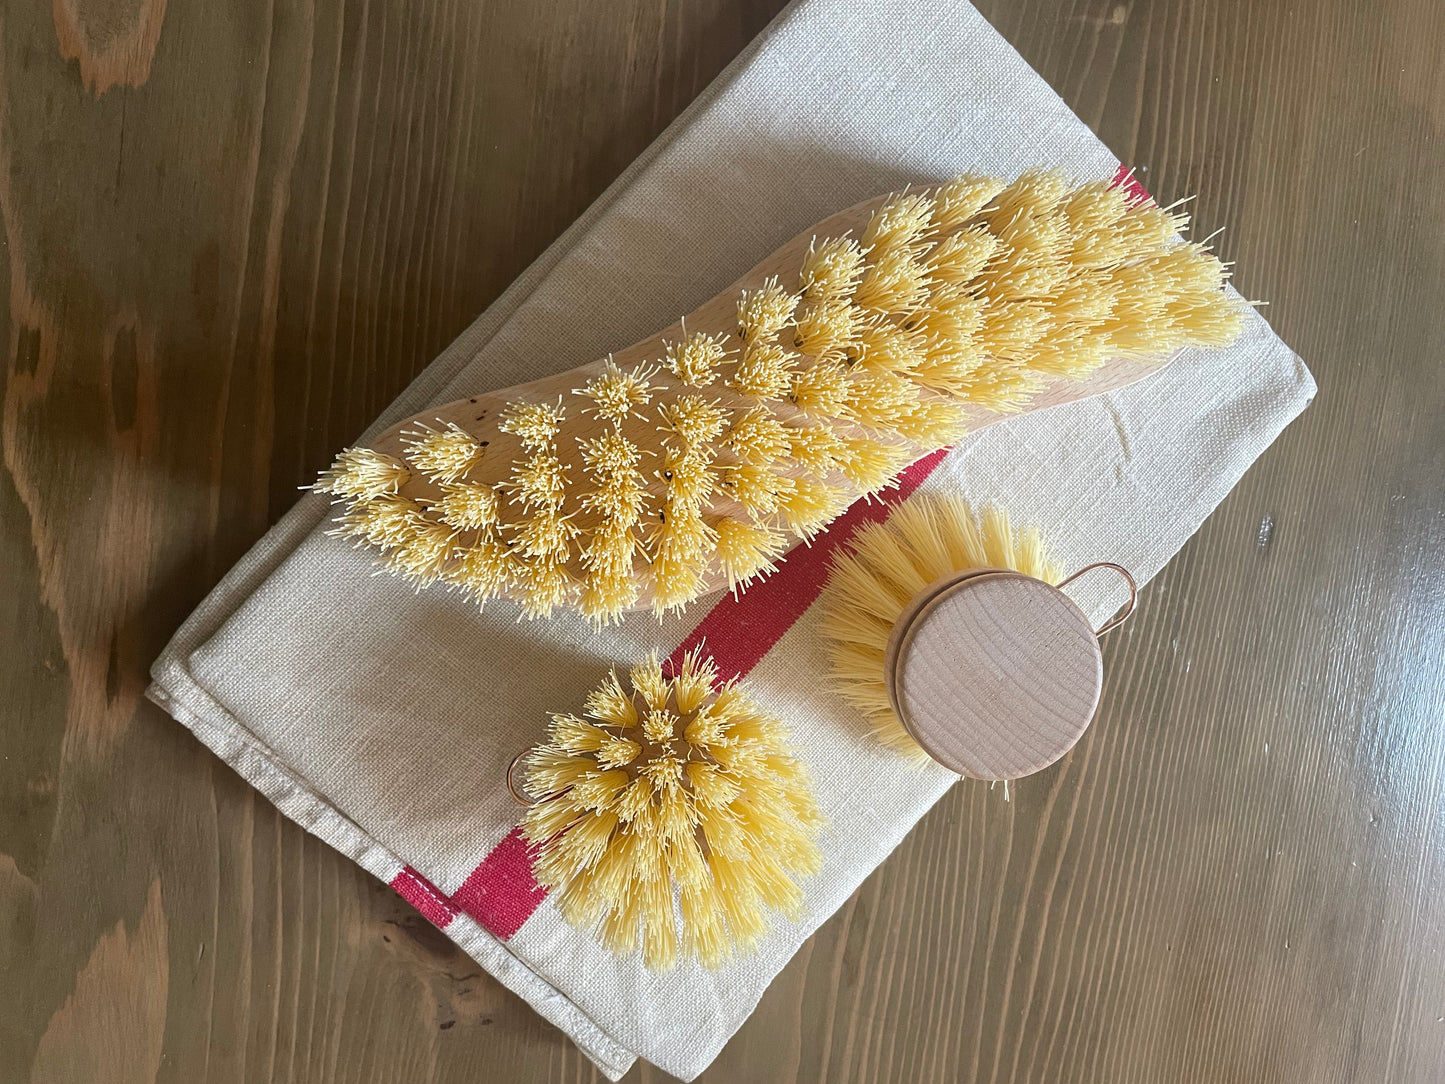 Eco-Friendly Scrub Brush - Sustainable Way to Clean